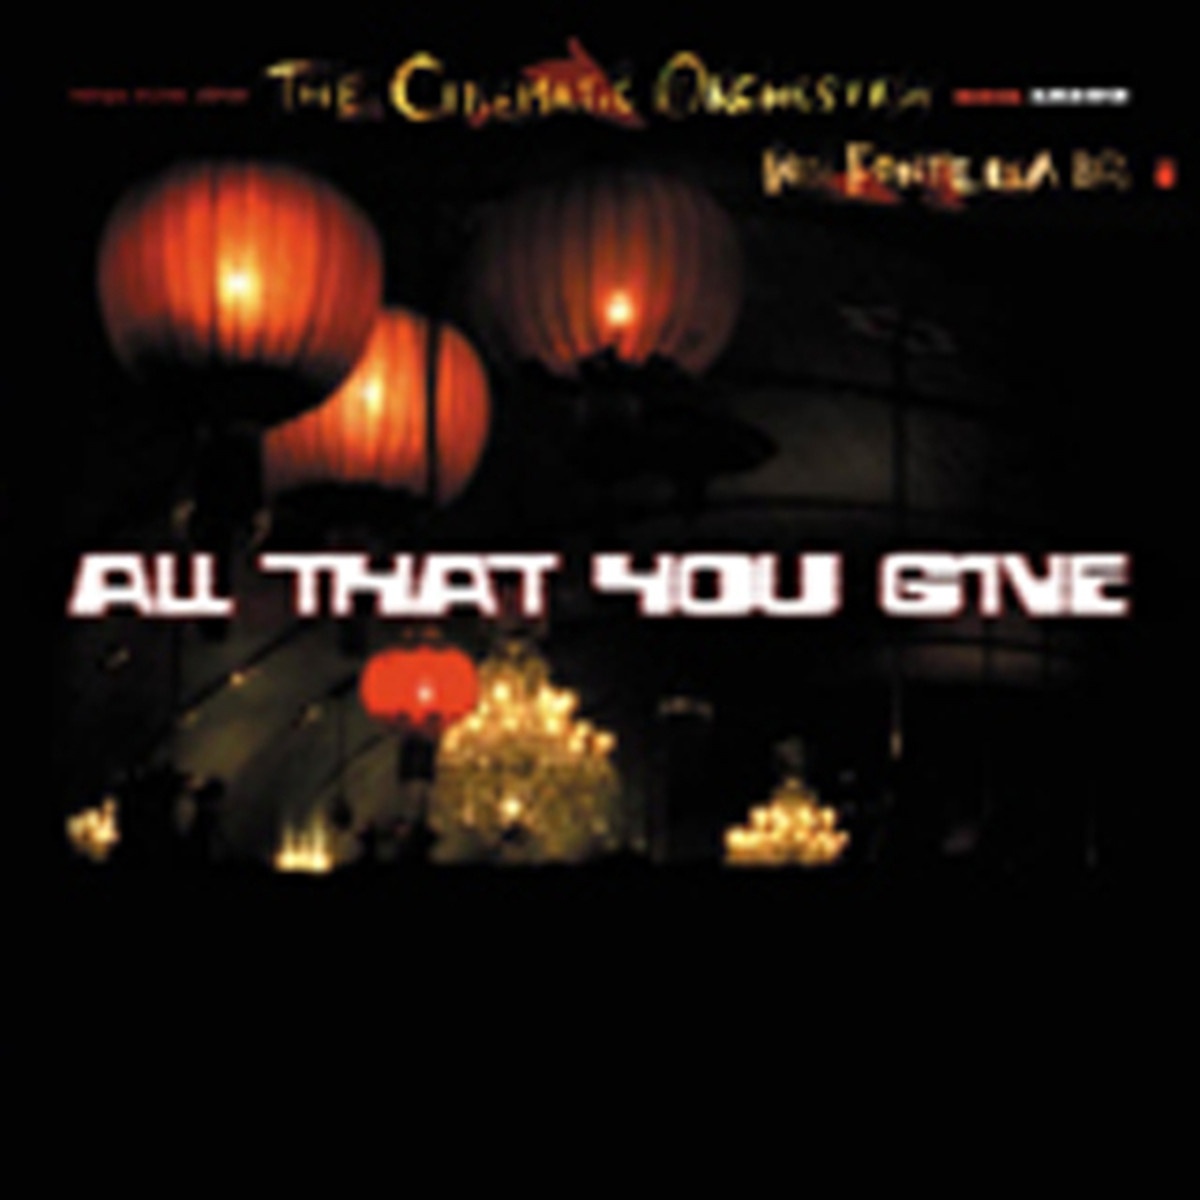 All That You Give (Dr Rockit's Giving Mix)